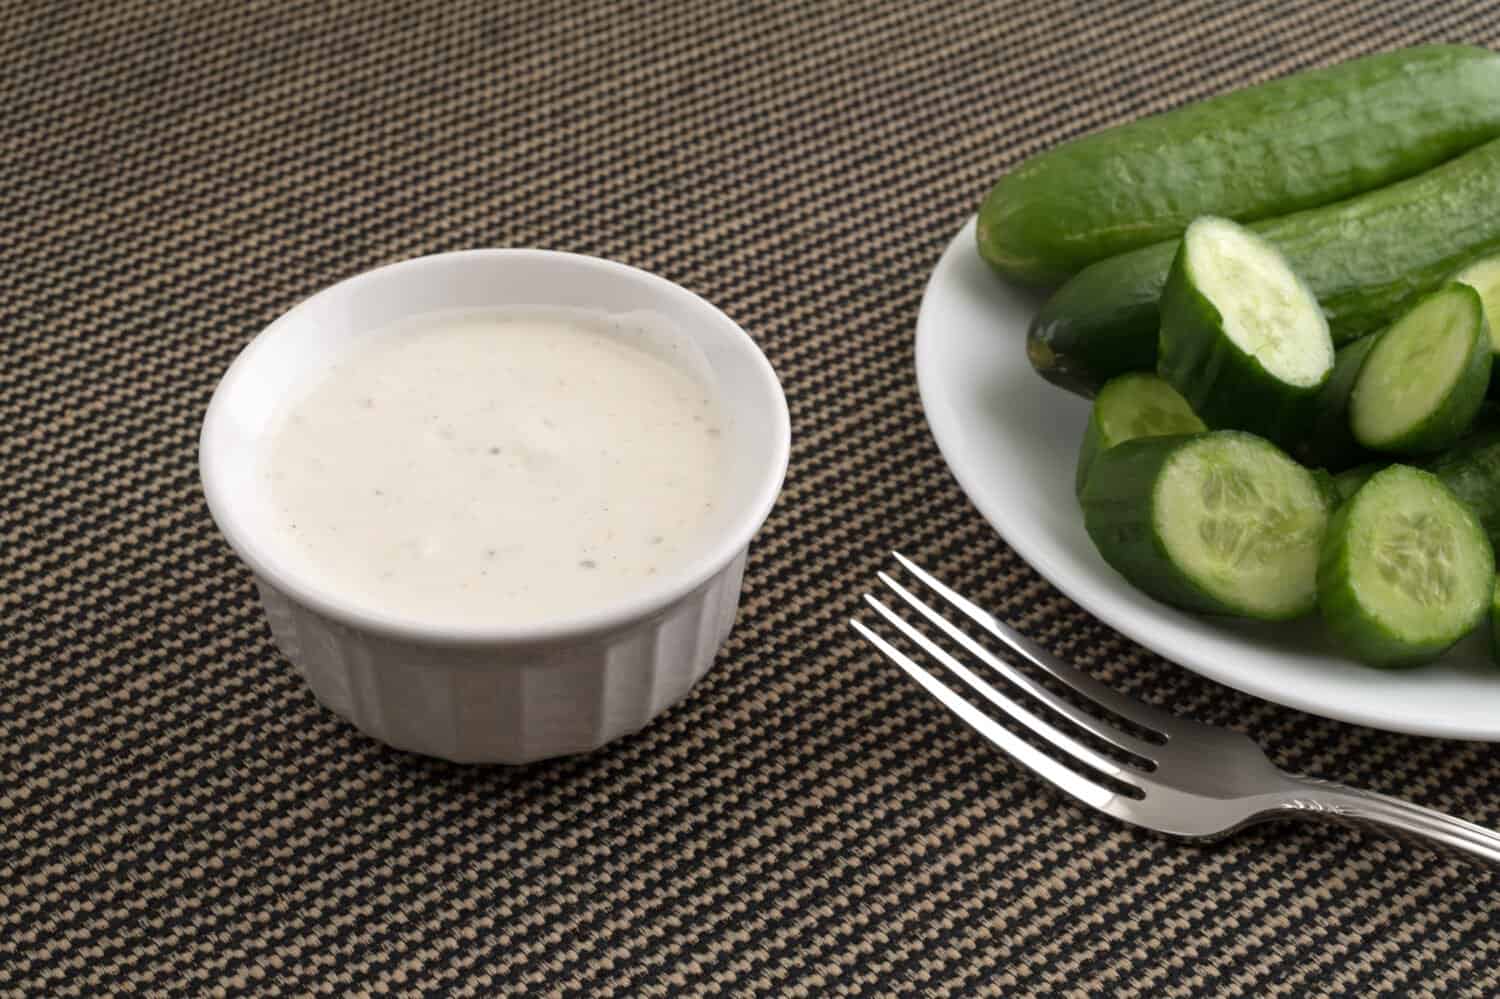 A small bowl of ranch dressing with sliced and whole bite size cucumbers on a white plate plus a fork in the foreground on a tablecloth.